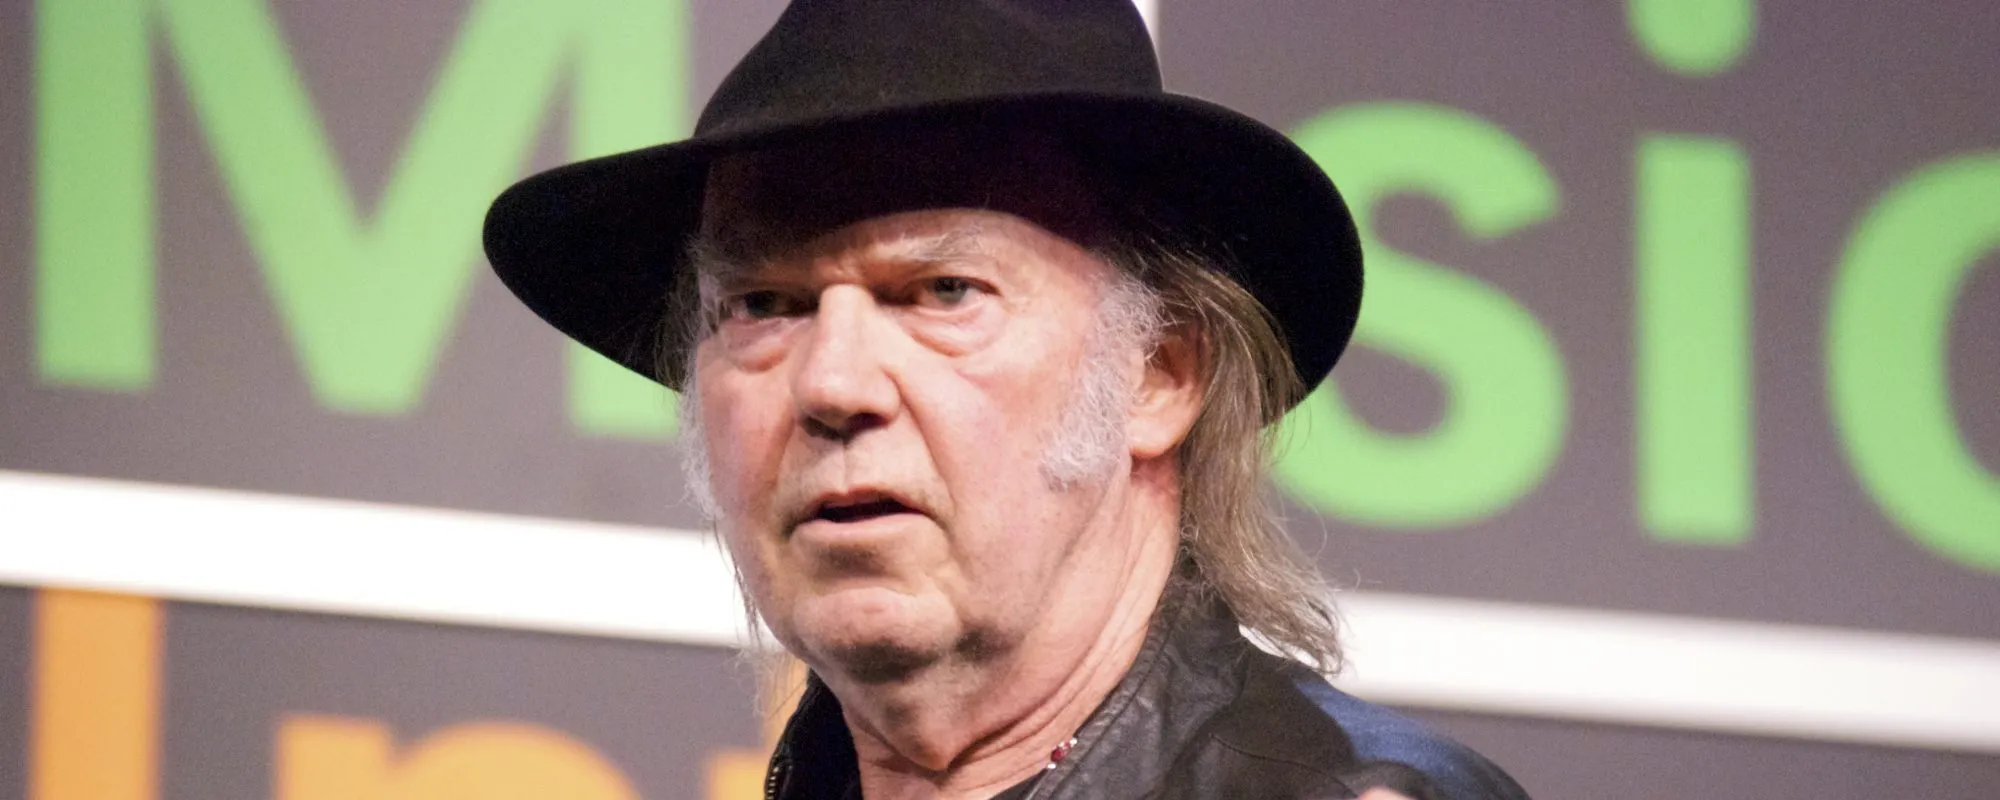 Neil Young Announces Track List for Long-awaited ‘Archives Vol. II’ Box